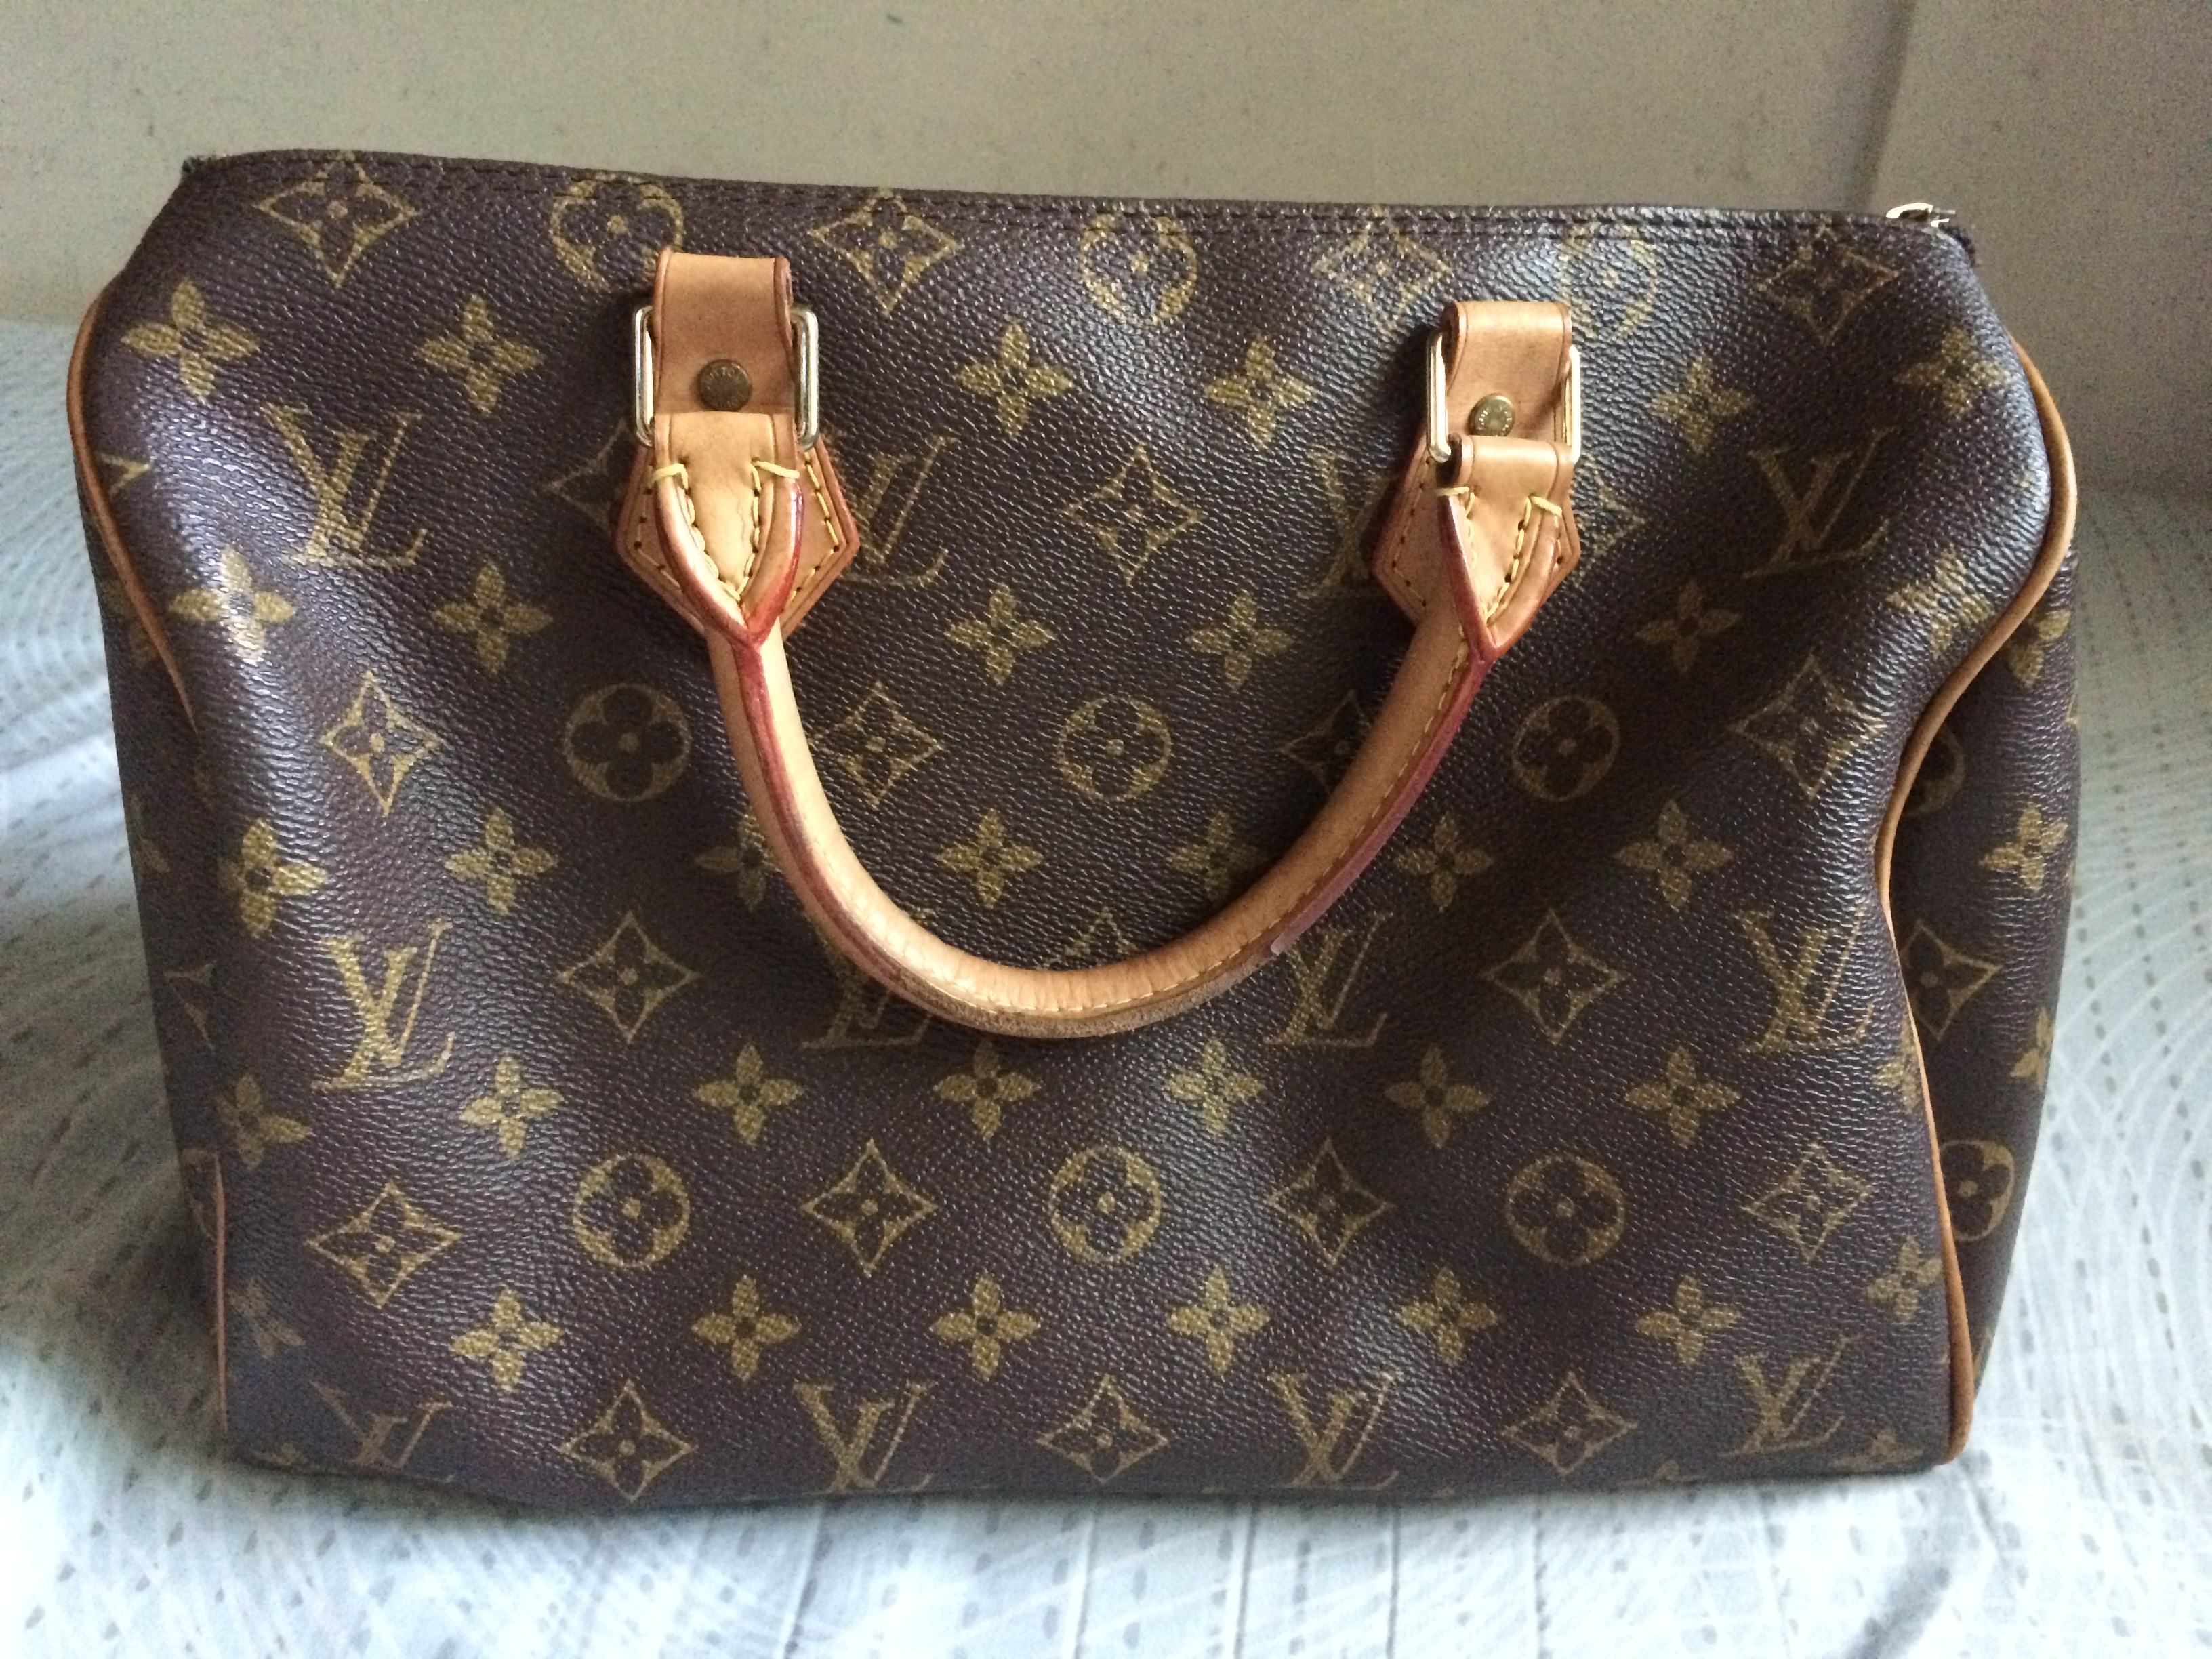 I bought this bag on the LV website and noticed the stitching on